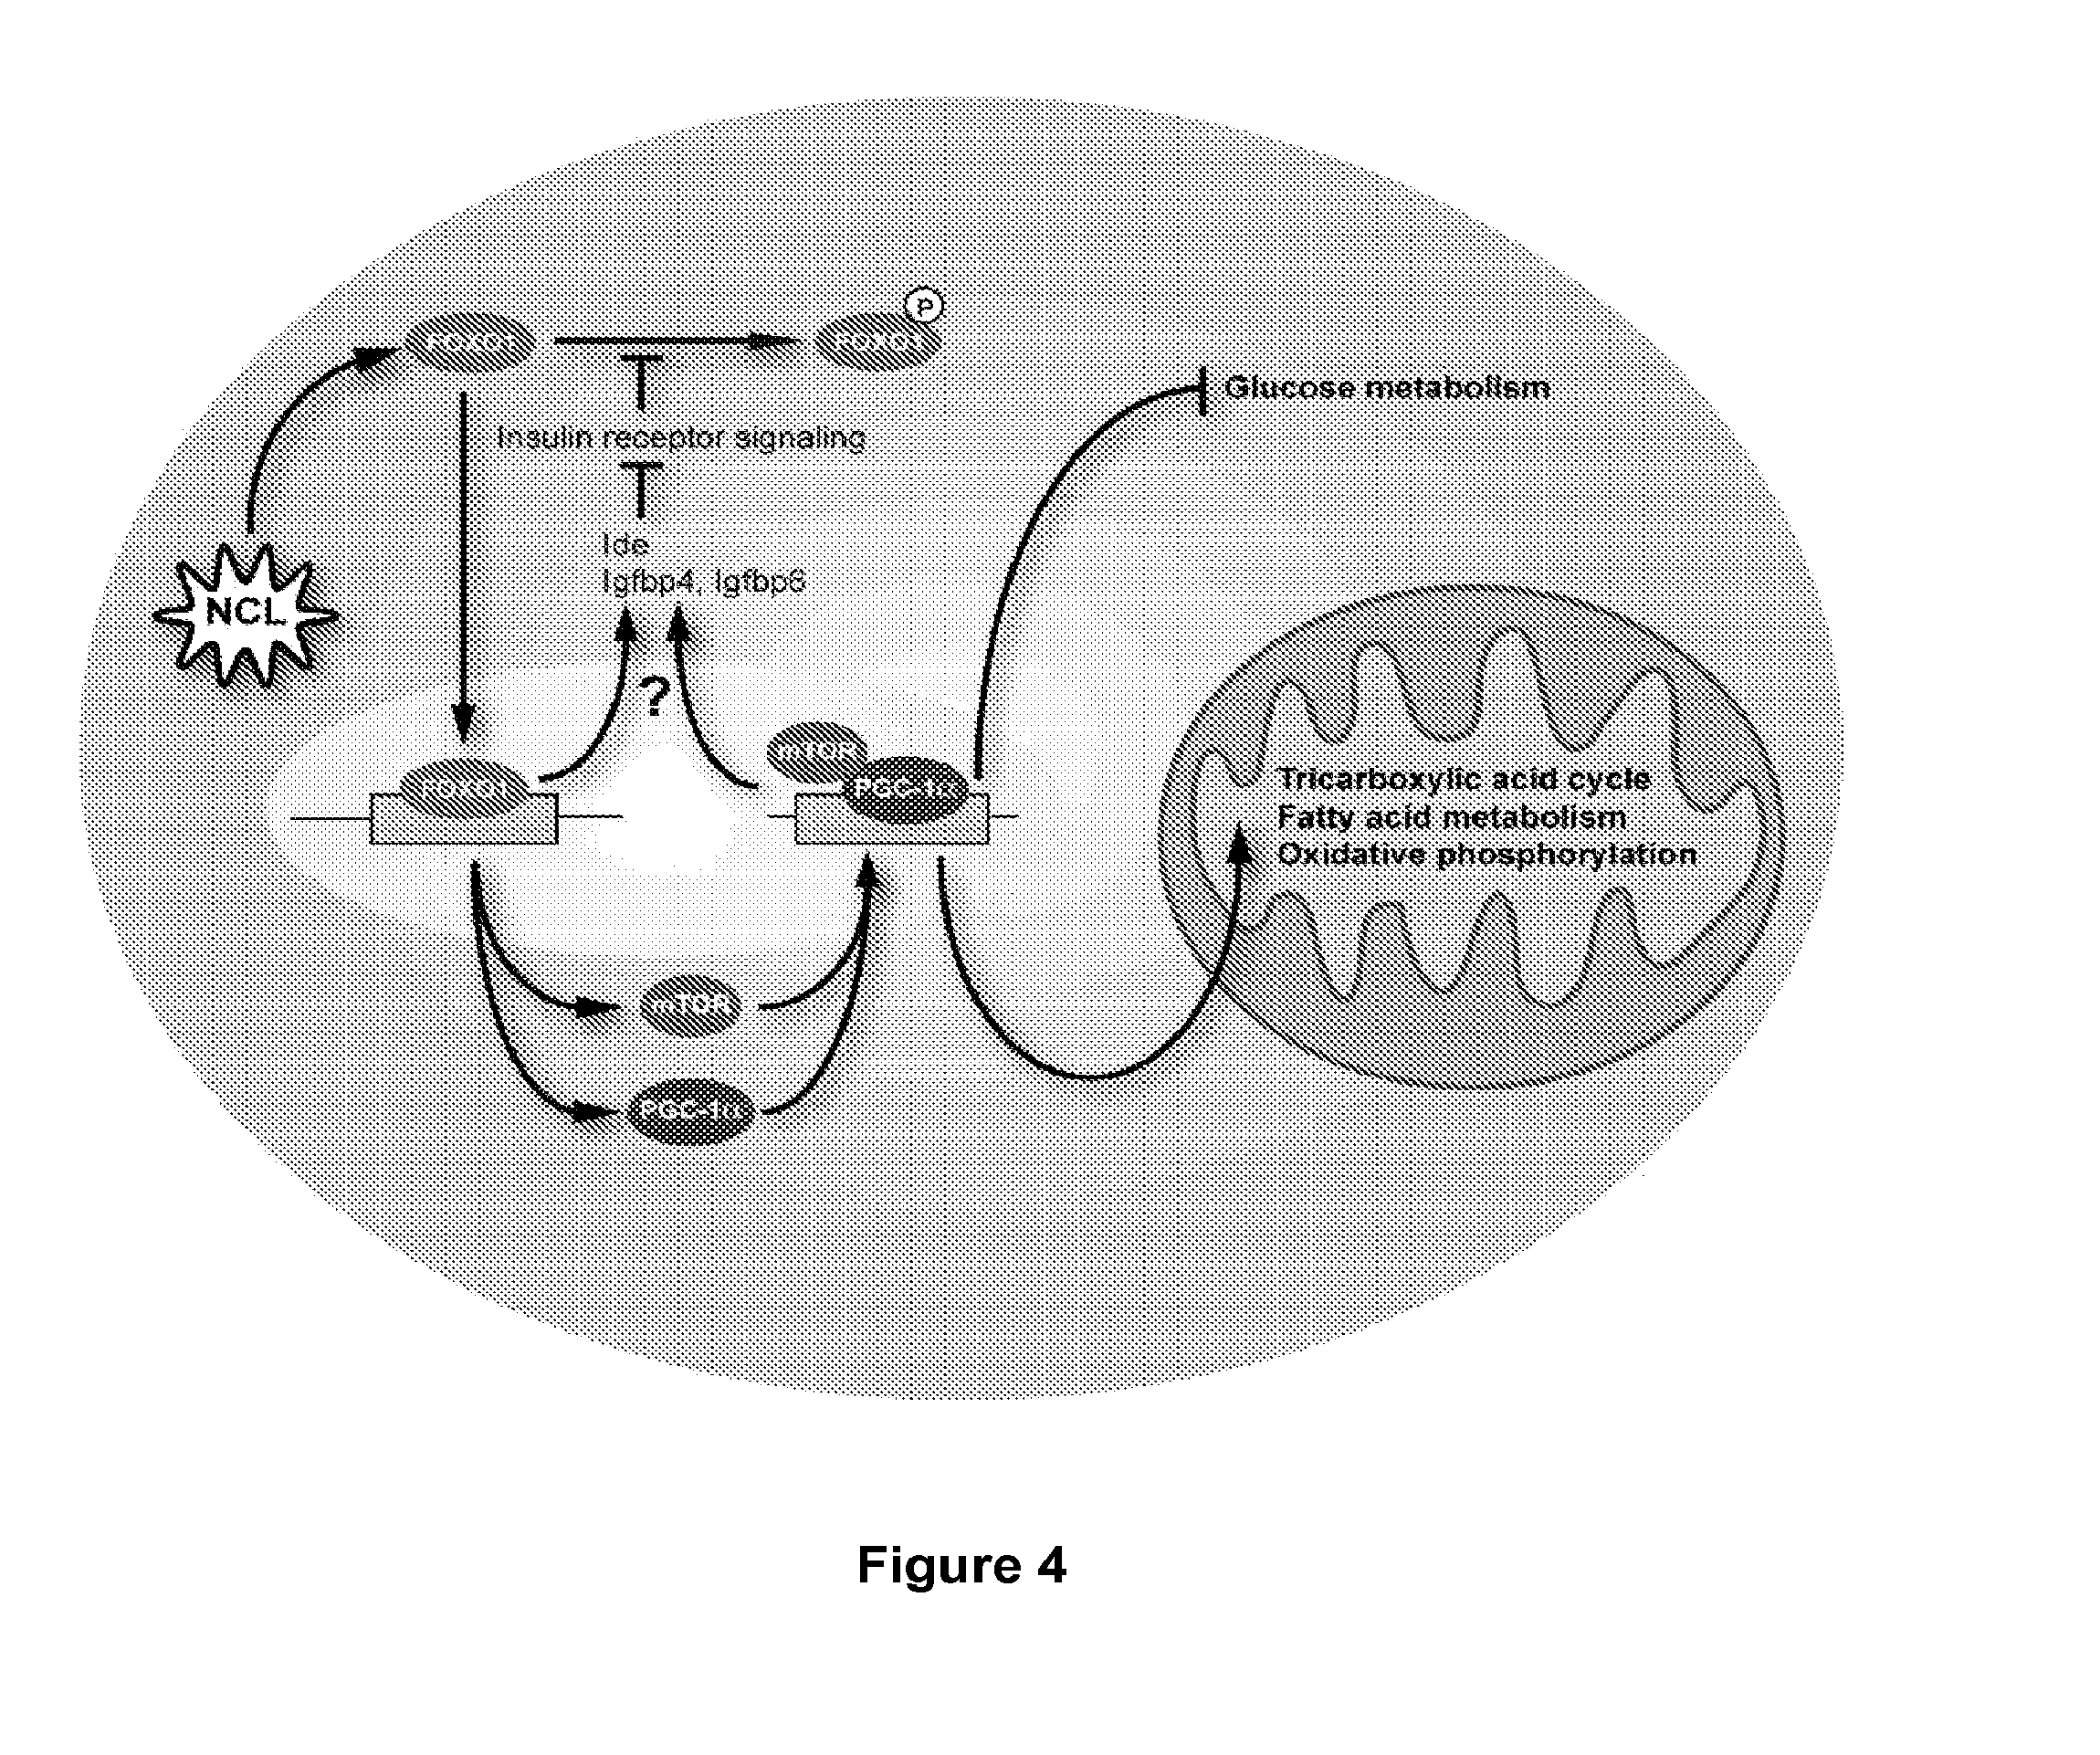 Resveratrol-Containing Compositions and Methods of Use for Treatment of Macular Degeneration